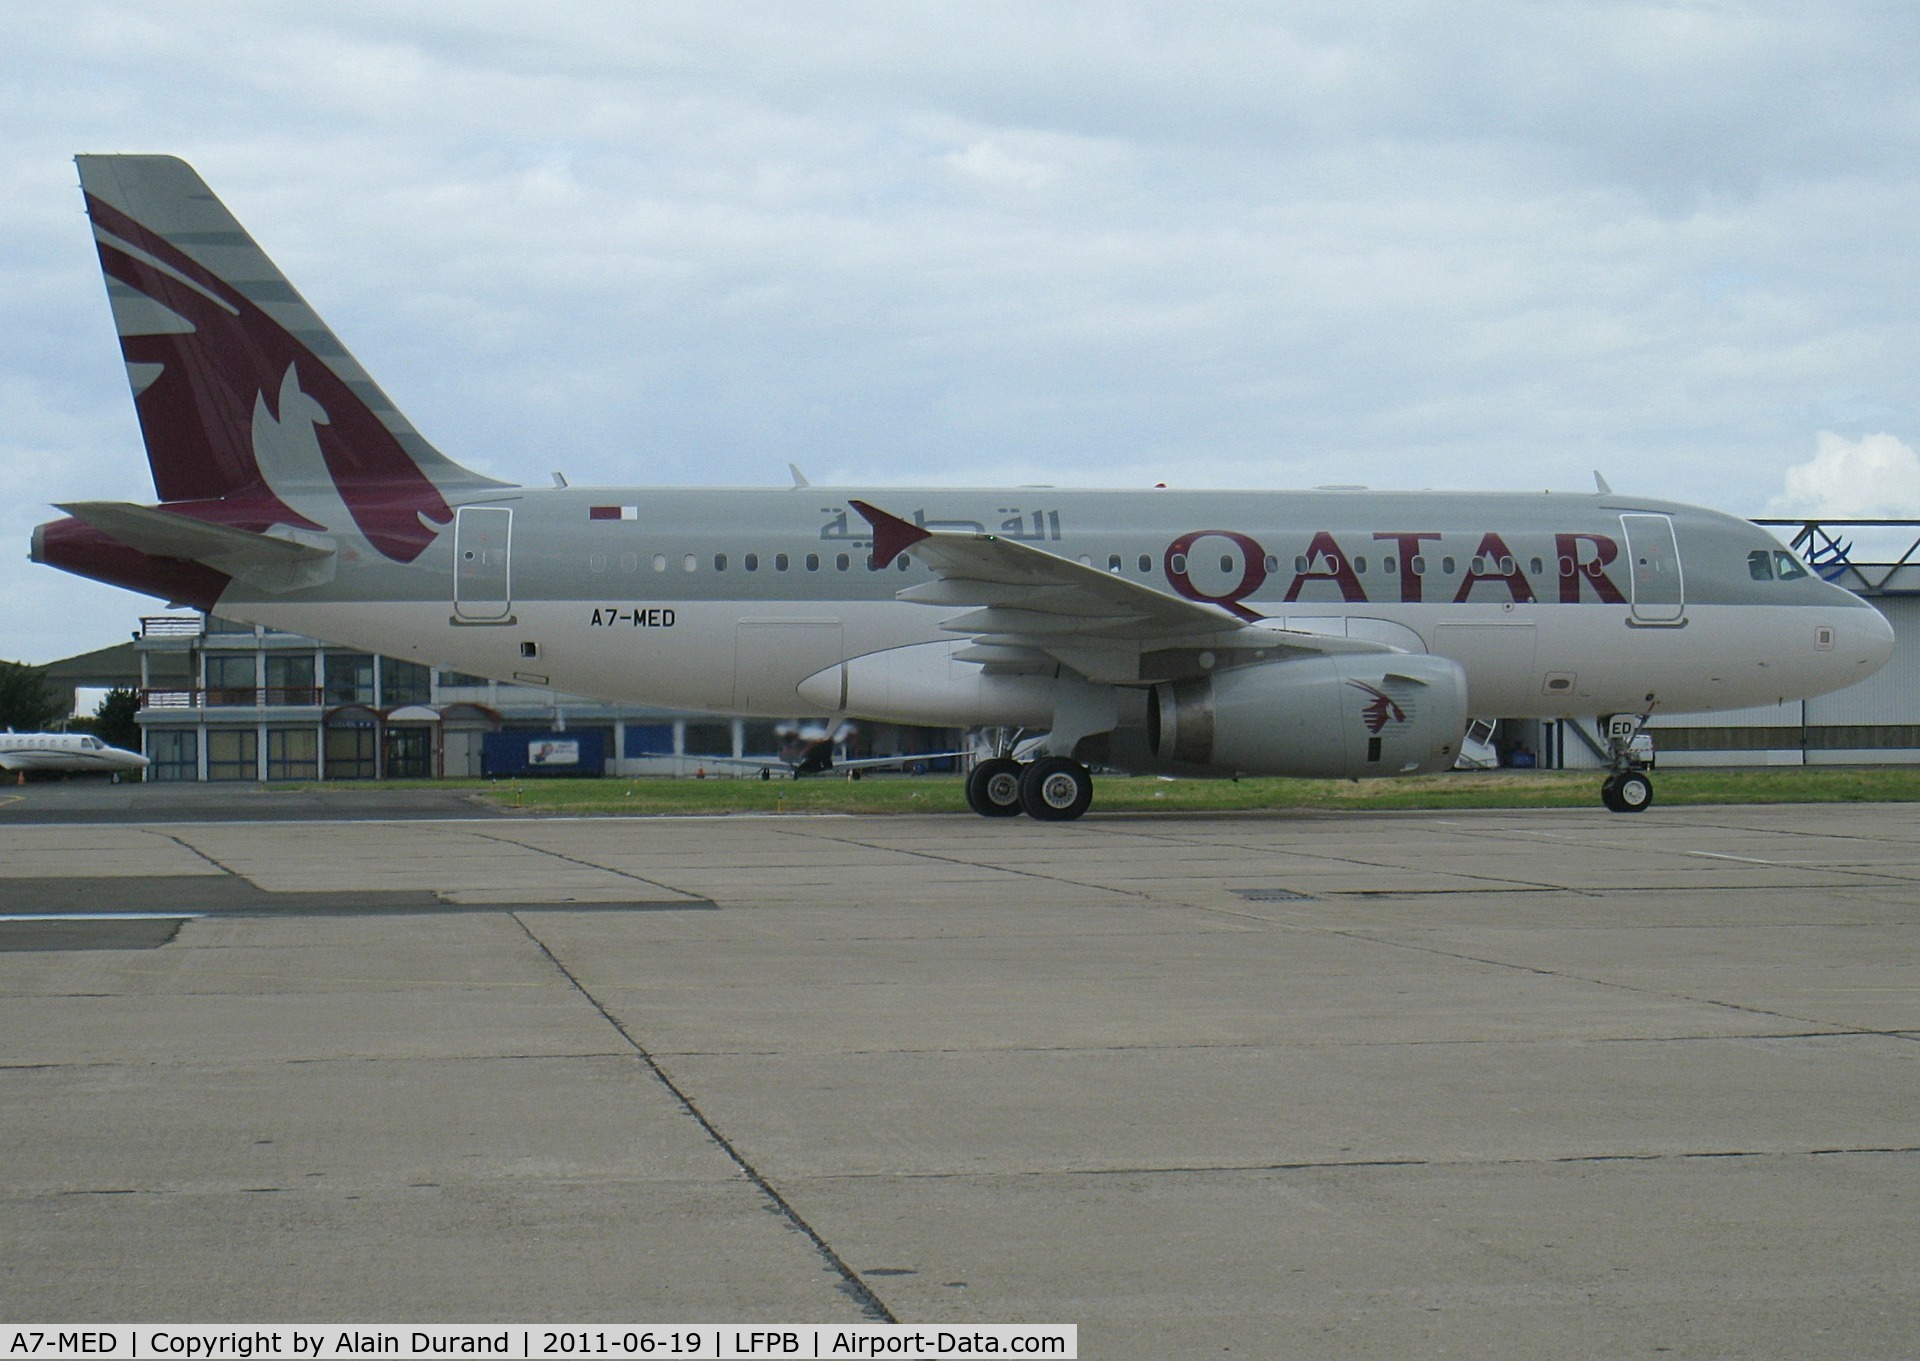 A7-MED, 2009 Airbus A319-133LR C/N 4114, One of quite a few tasked on Qatar Executive